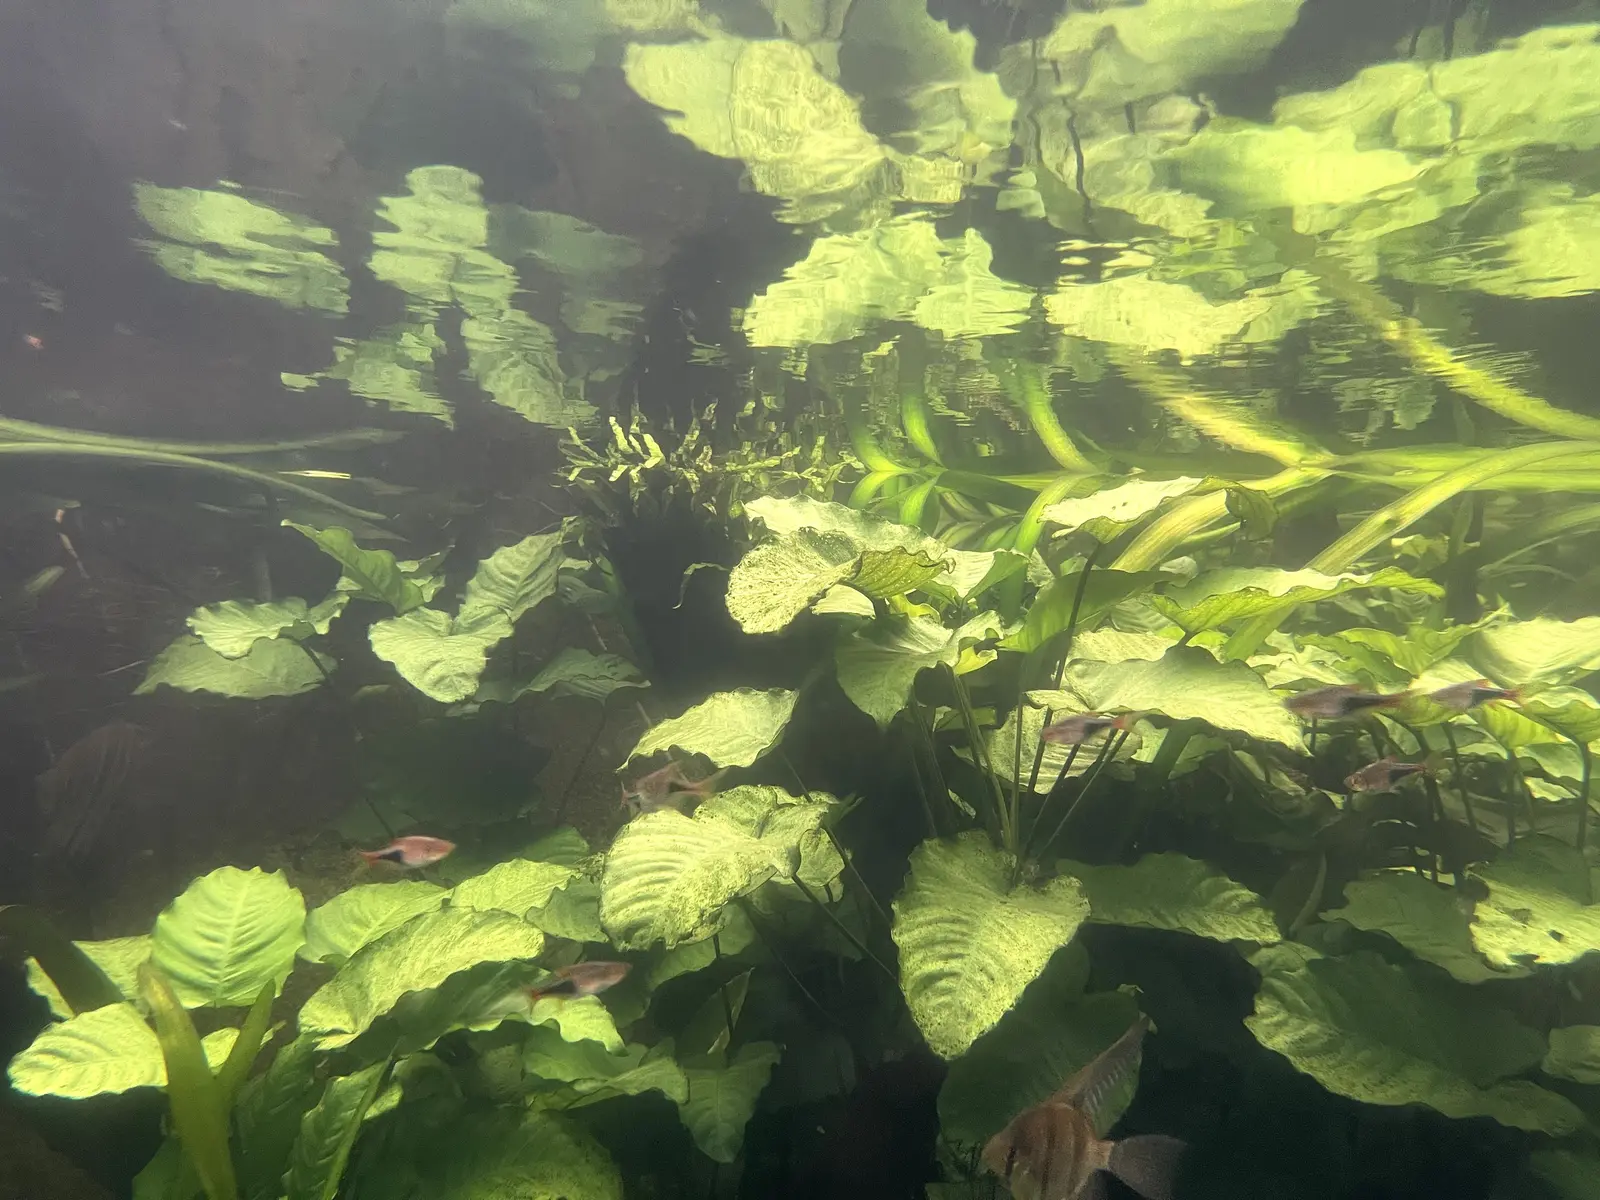 Plants and fish underwater